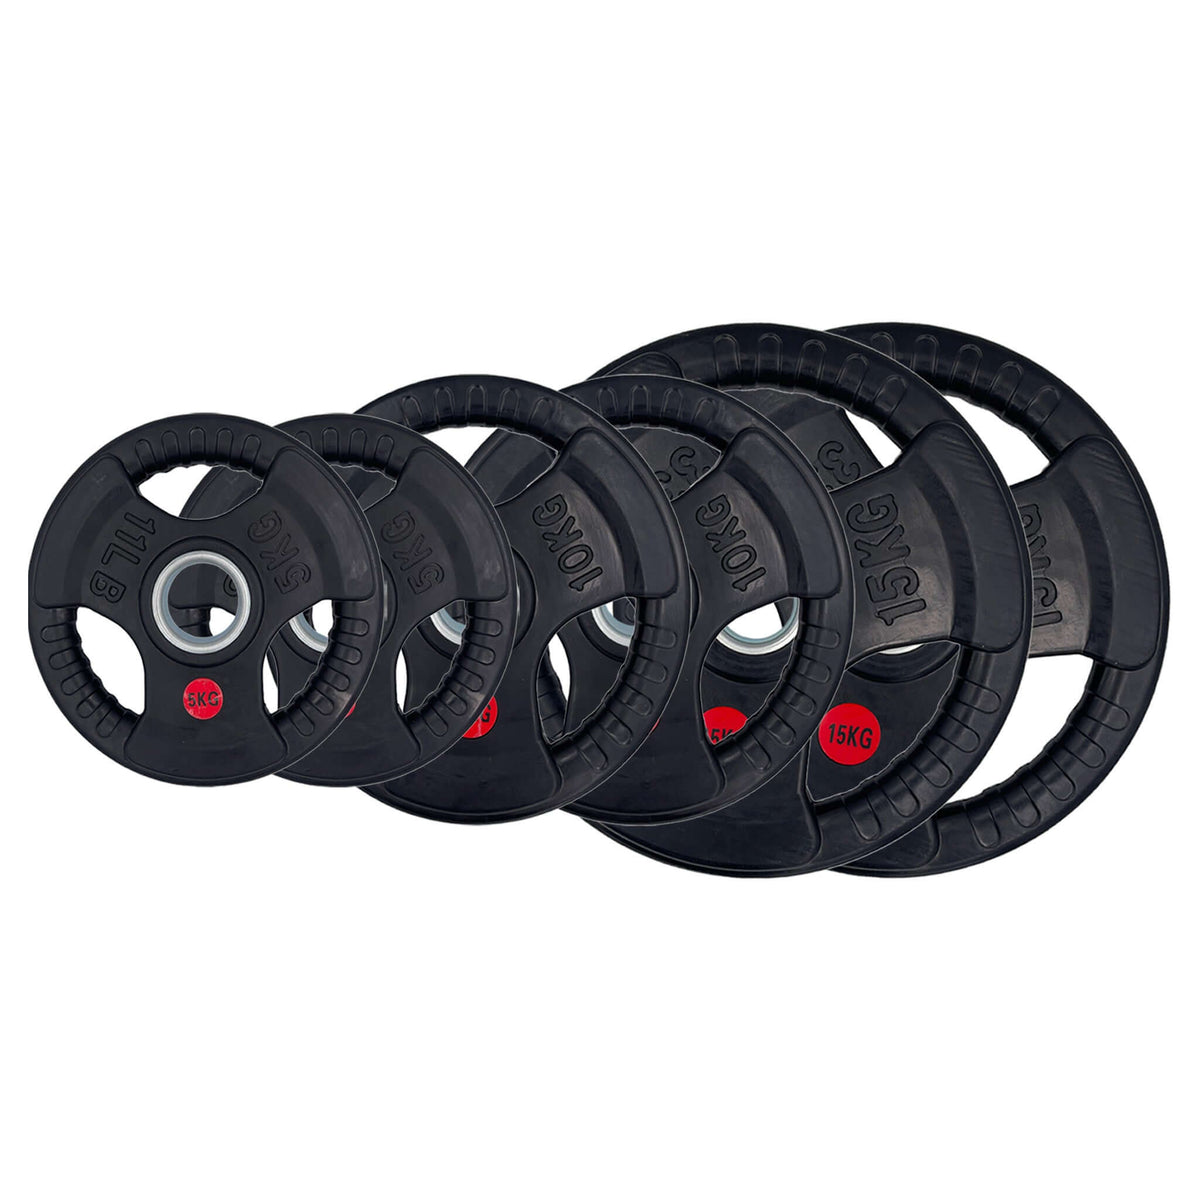 60kg - 157.5kg Full Sets Rubber Tri-Grip Weight Plates Type-O | INSOURCE